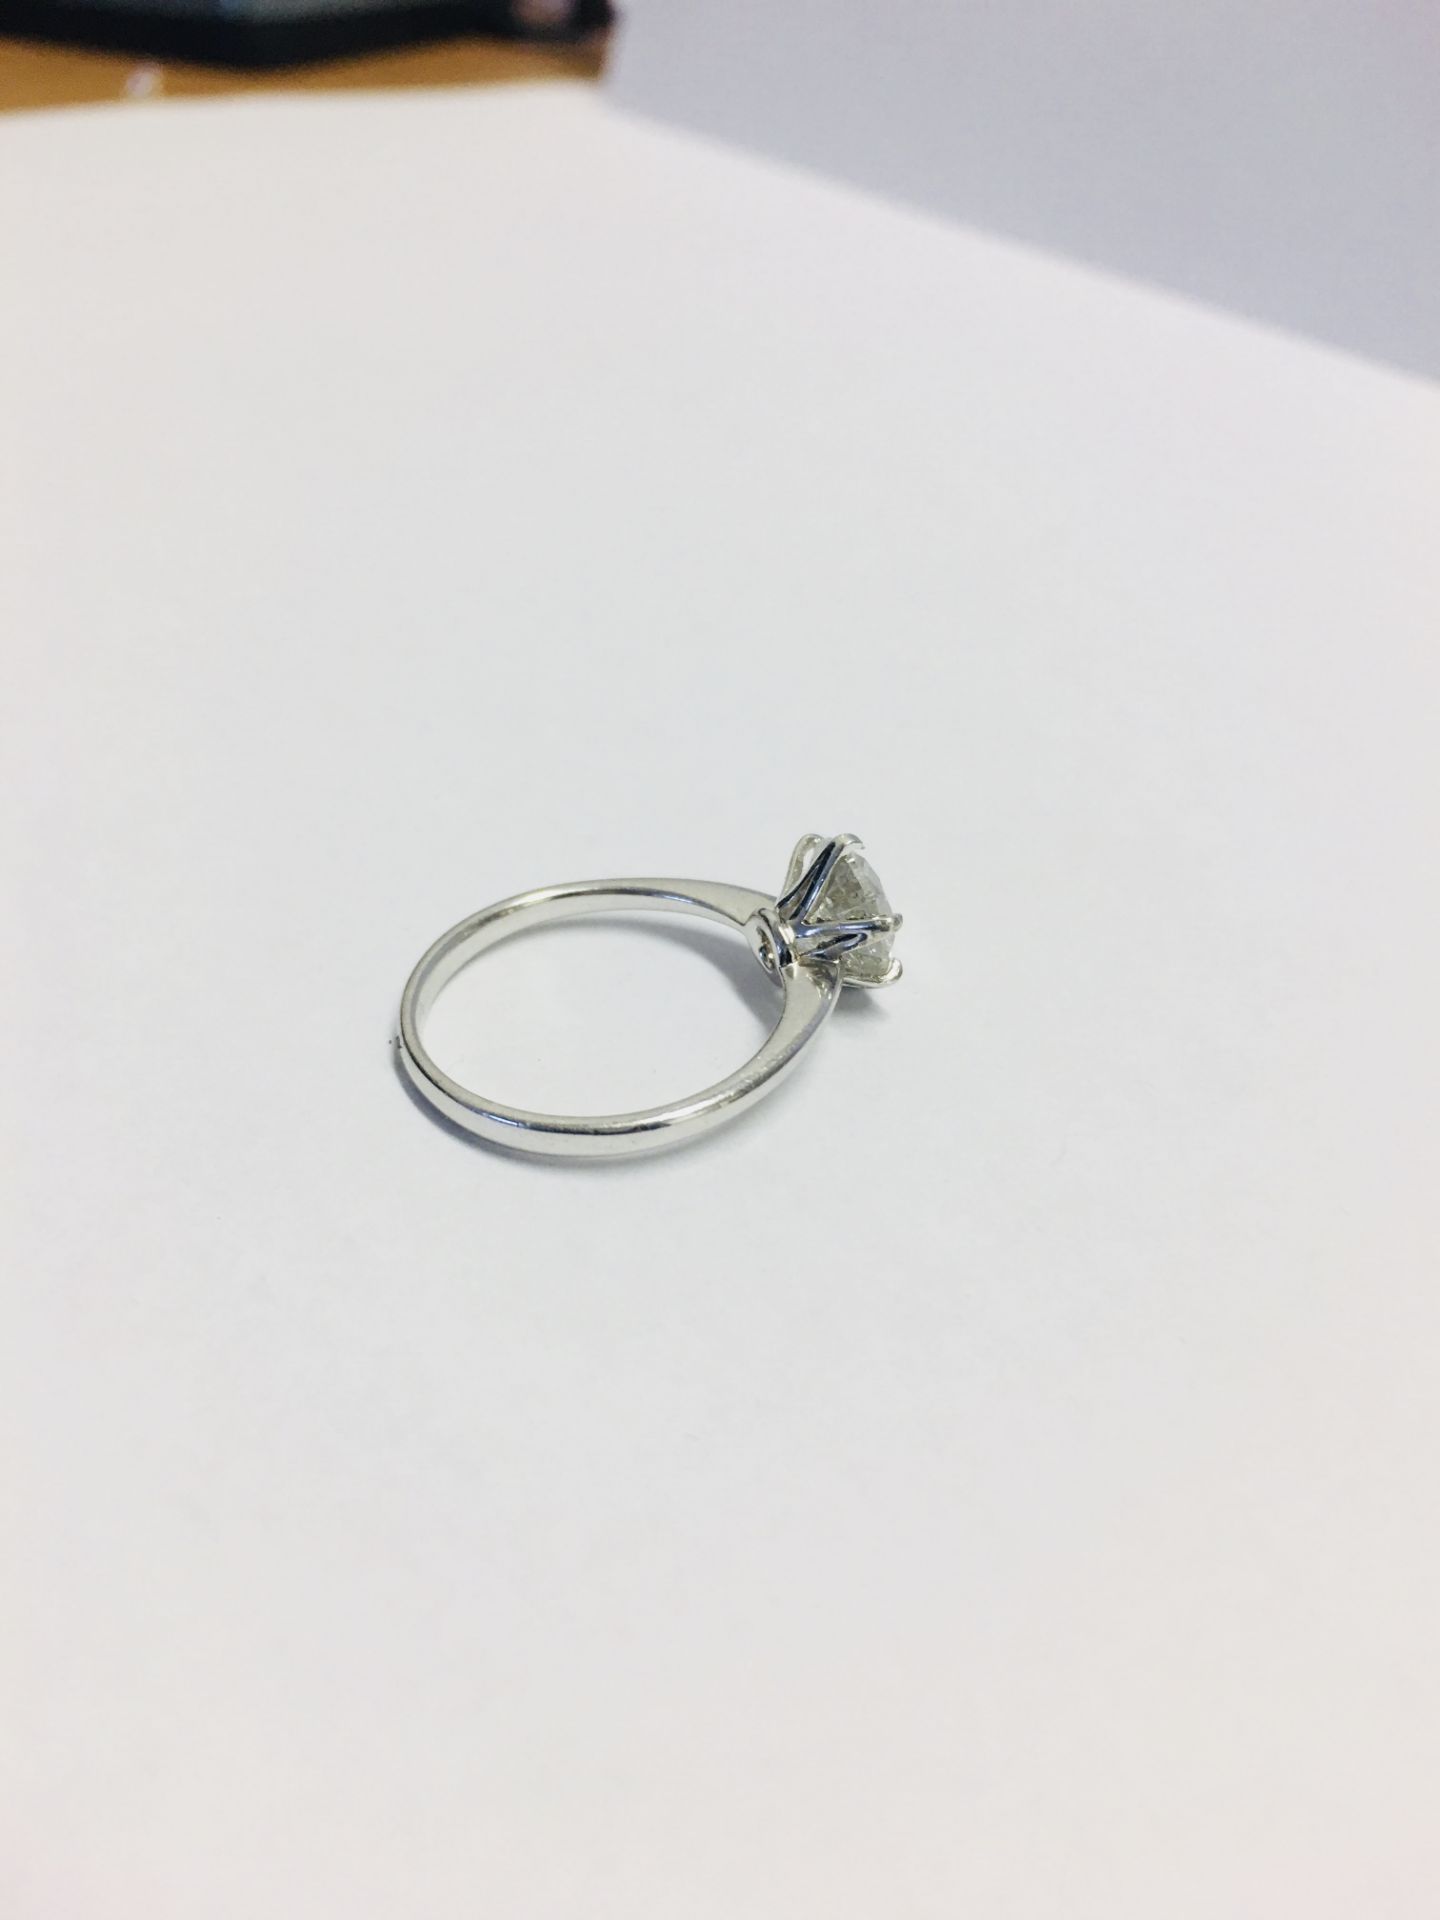 Diamond Solitaire Ring, - Image 4 of 6